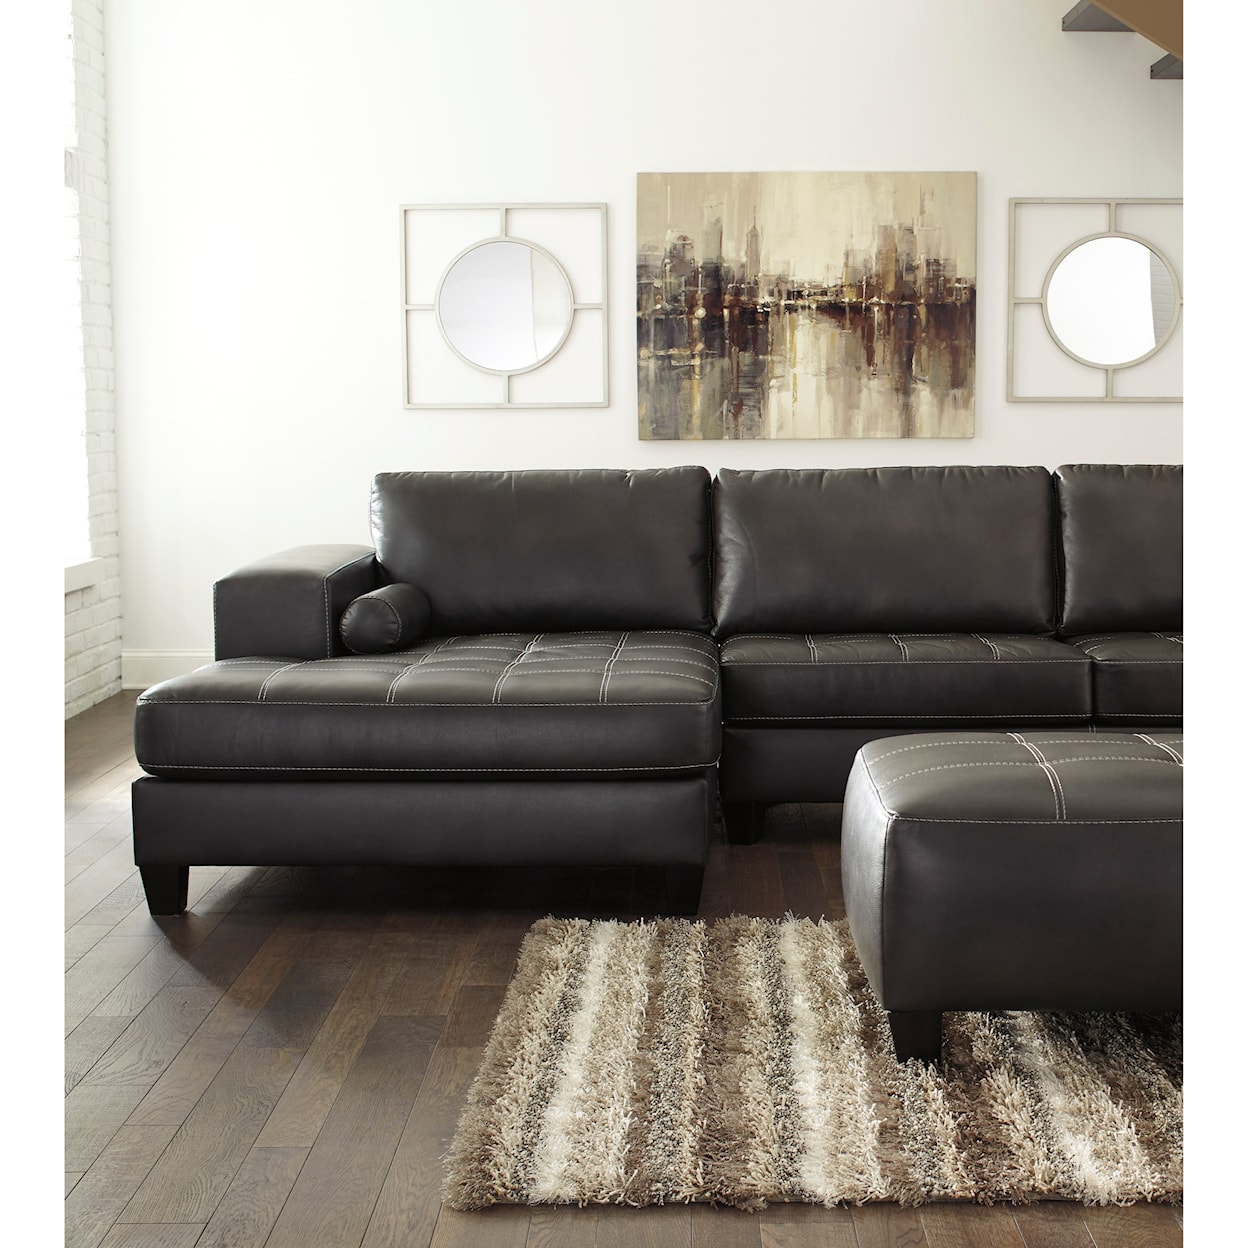 Ashley Furniture Signature Design Nokomis 2-Piece Sectional with Chaise